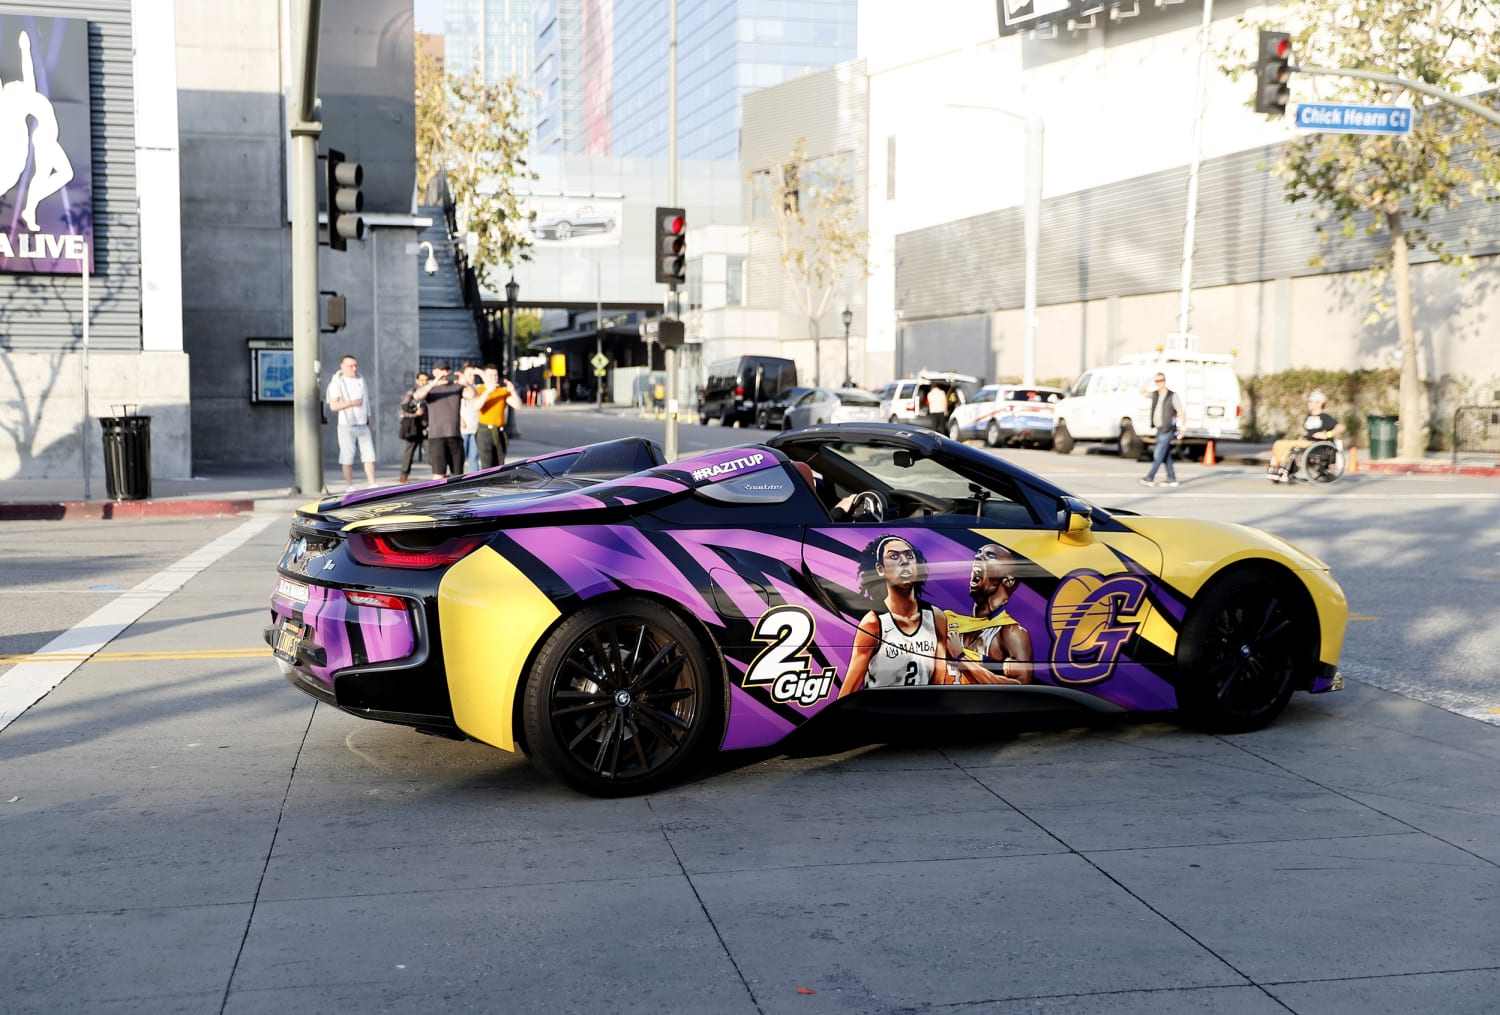 Special No. 24 Axalta tribute car to benefit a favorite Kobe Bryant charity